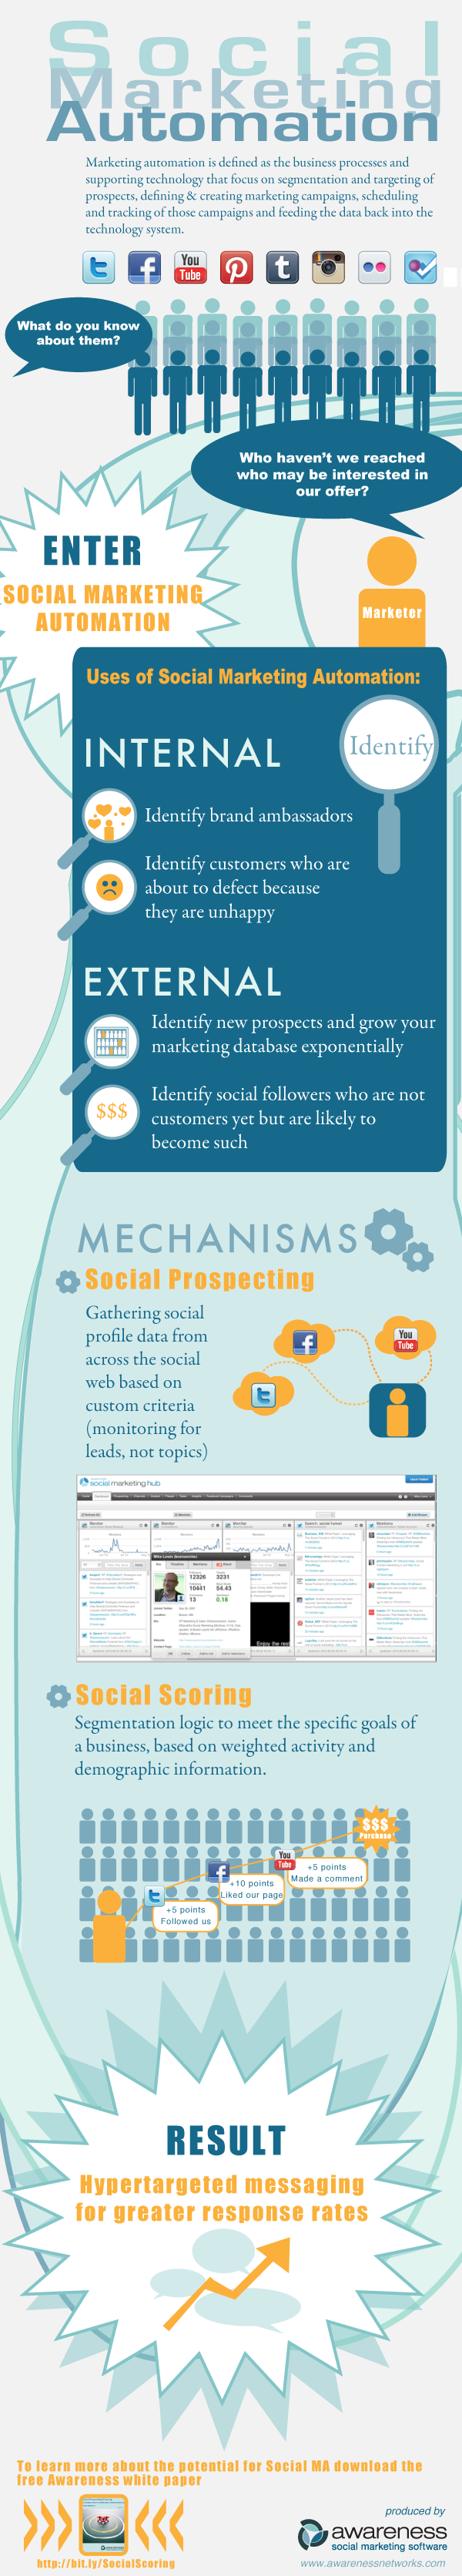 Social Media Marketing Automation-Infographic